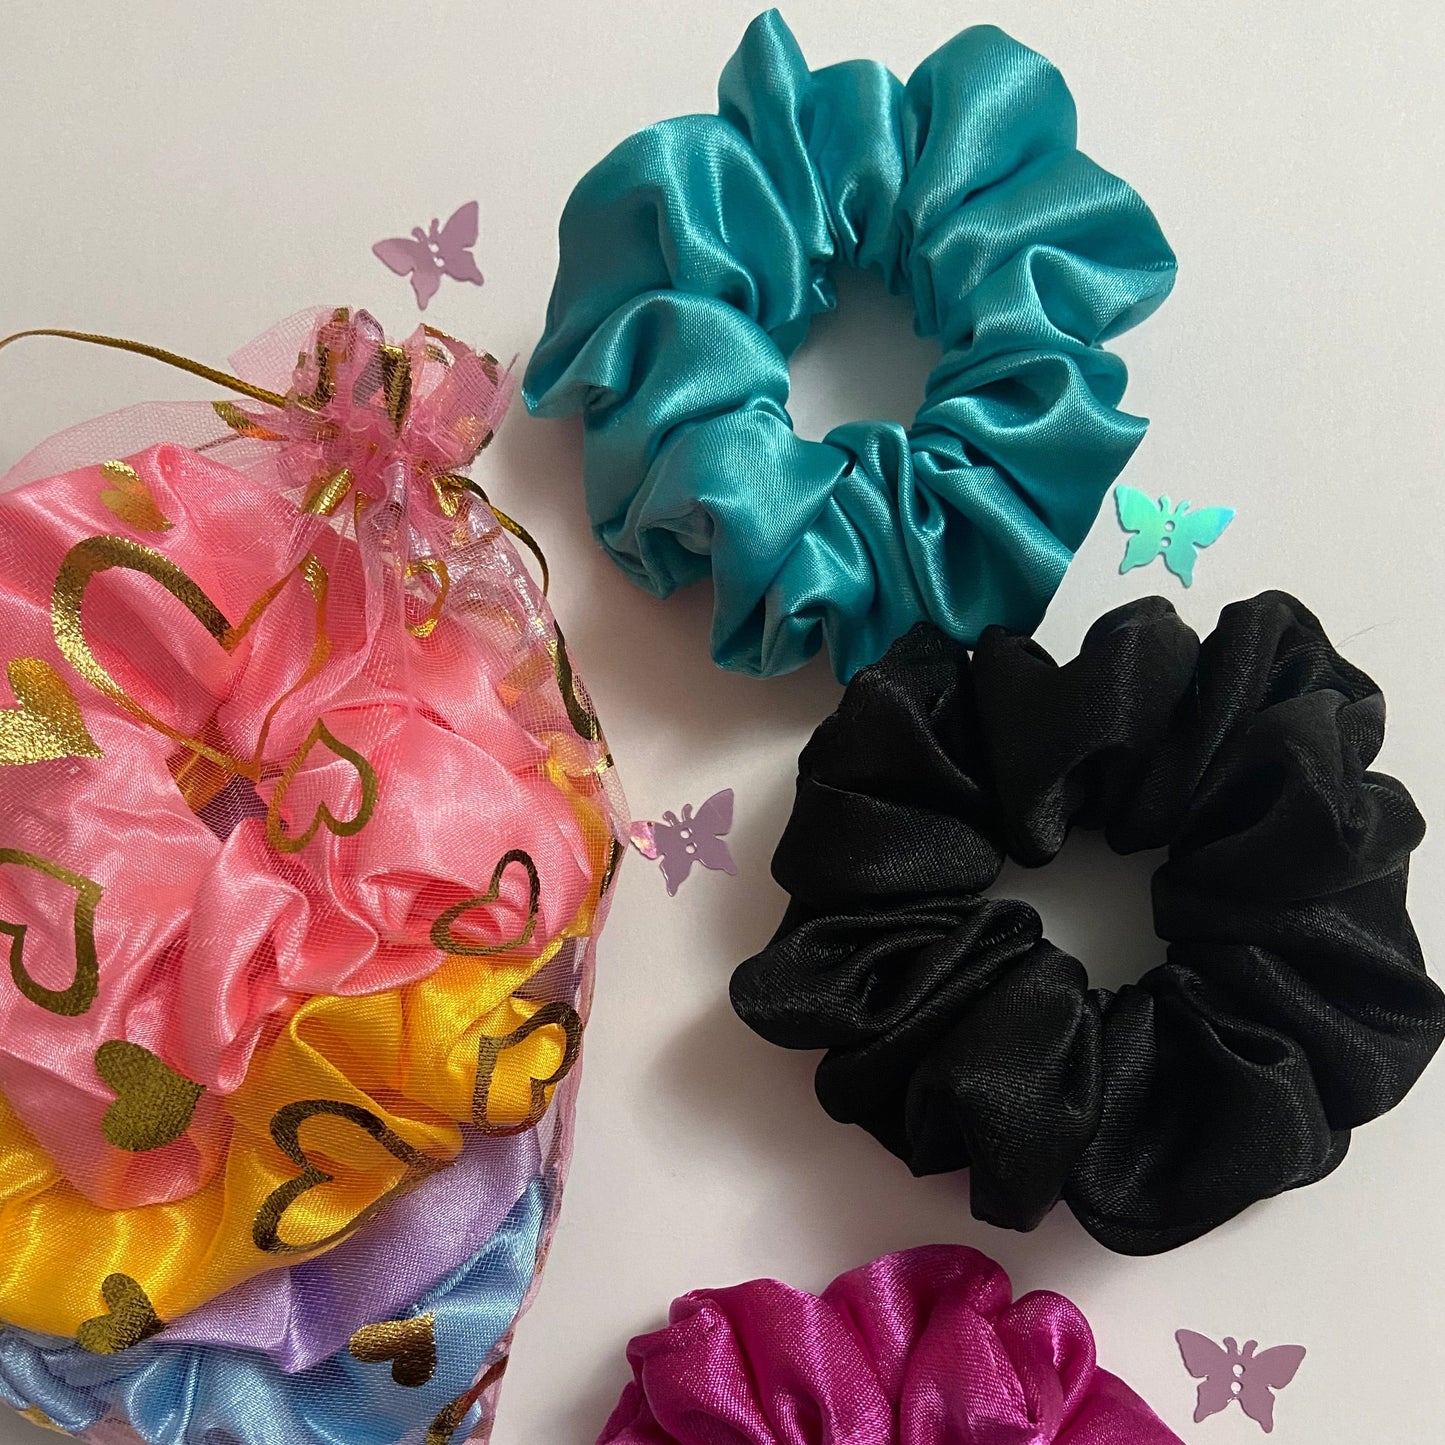 Turquoise Scrunchies